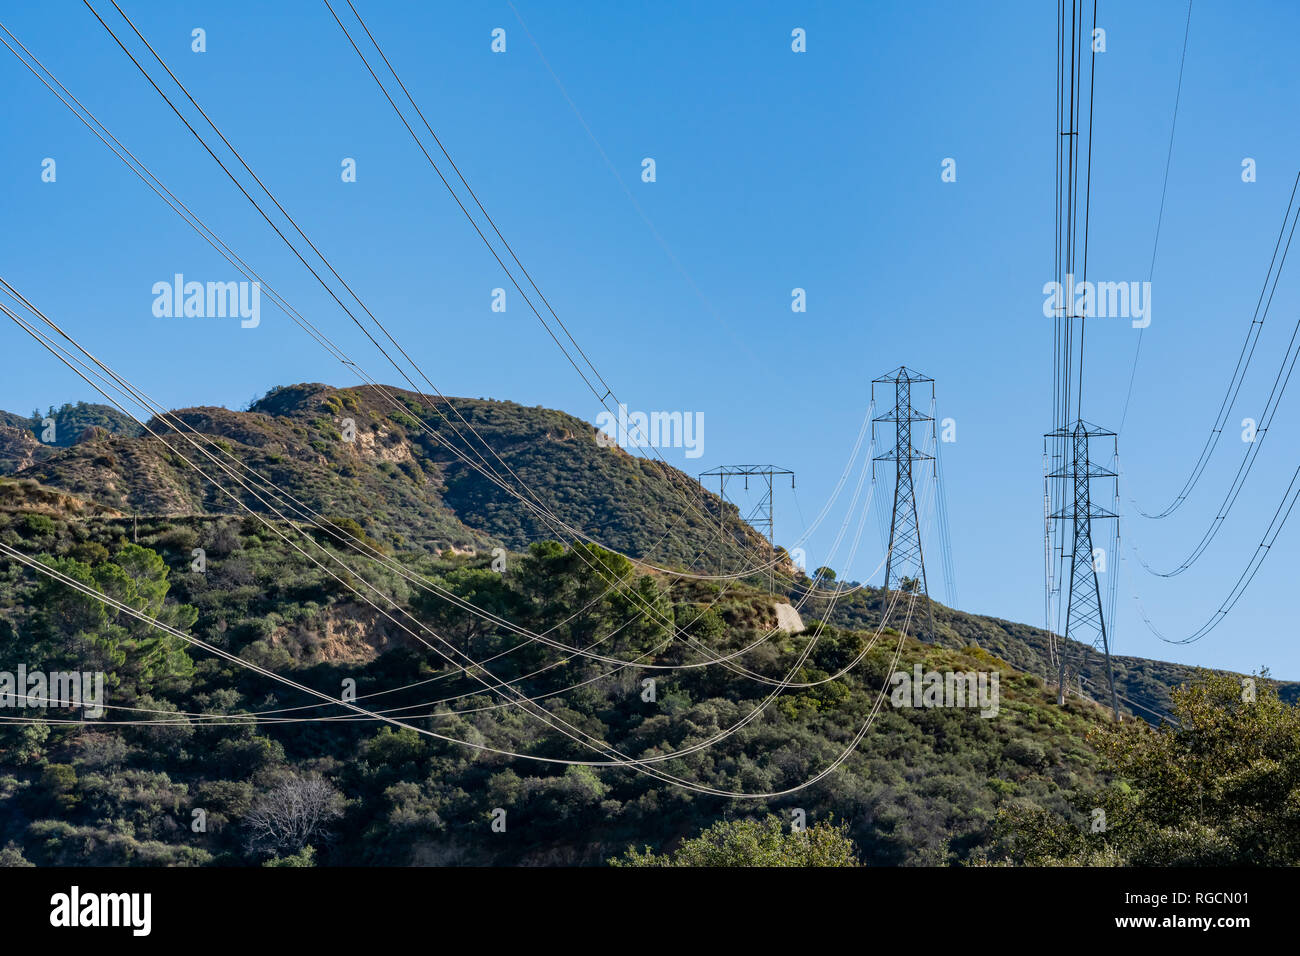 Morning view of transmission tower, power lines at Los Angeles, California Stock Photo